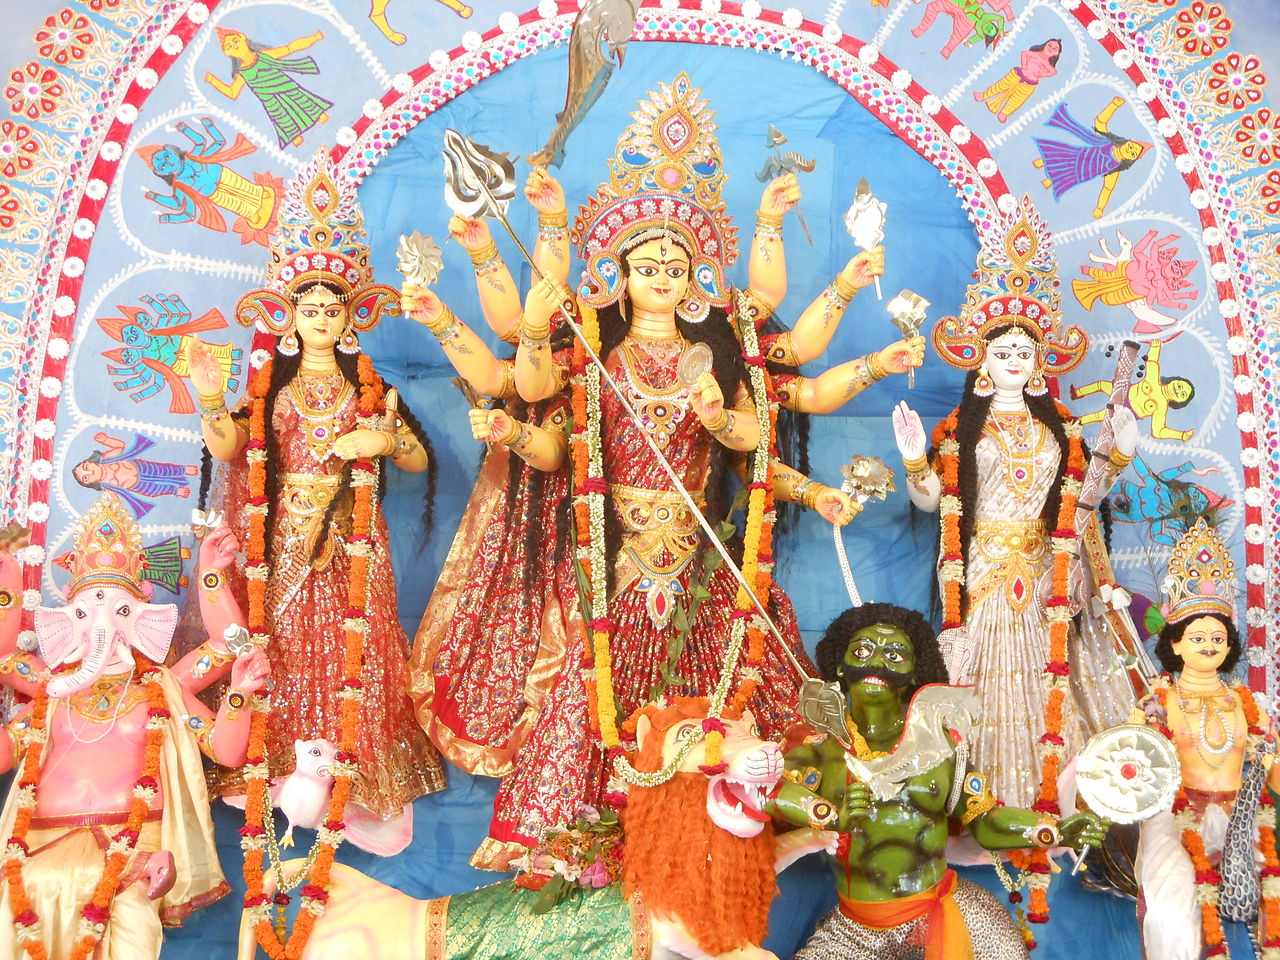 Here, know about the Durga Puja 2017